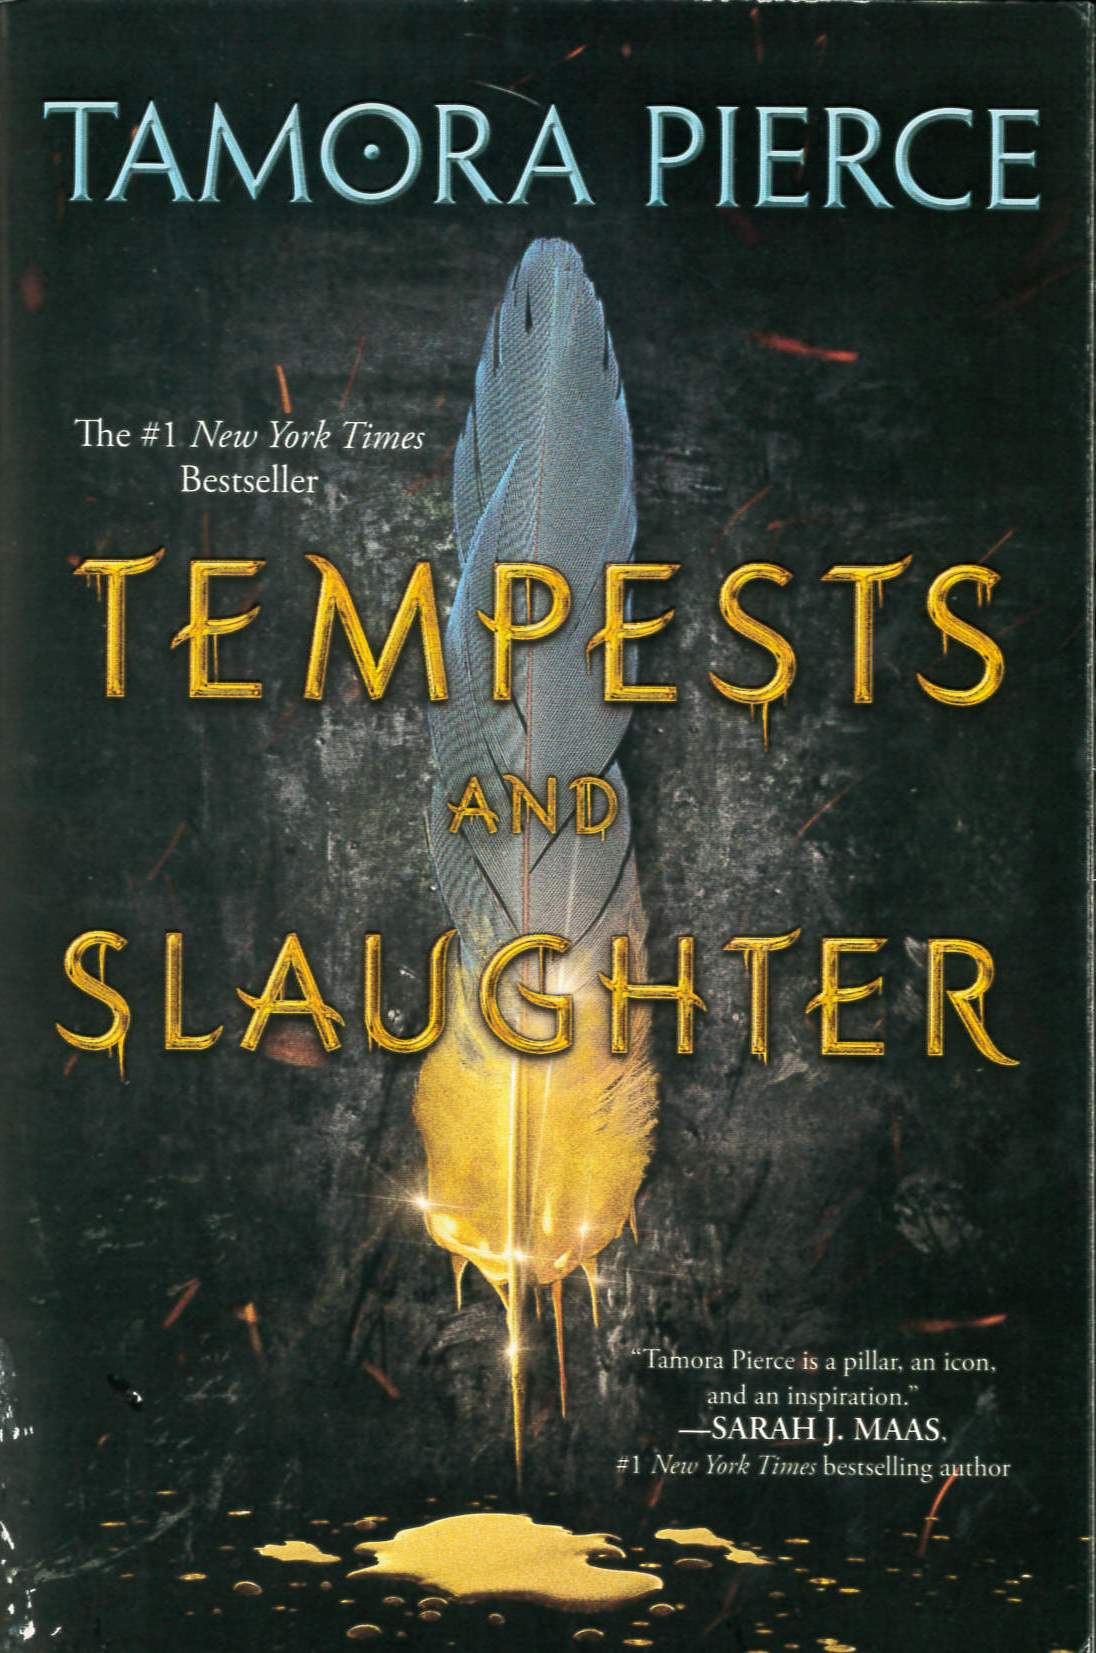 Tempests and slaughter : a Tortall legend /